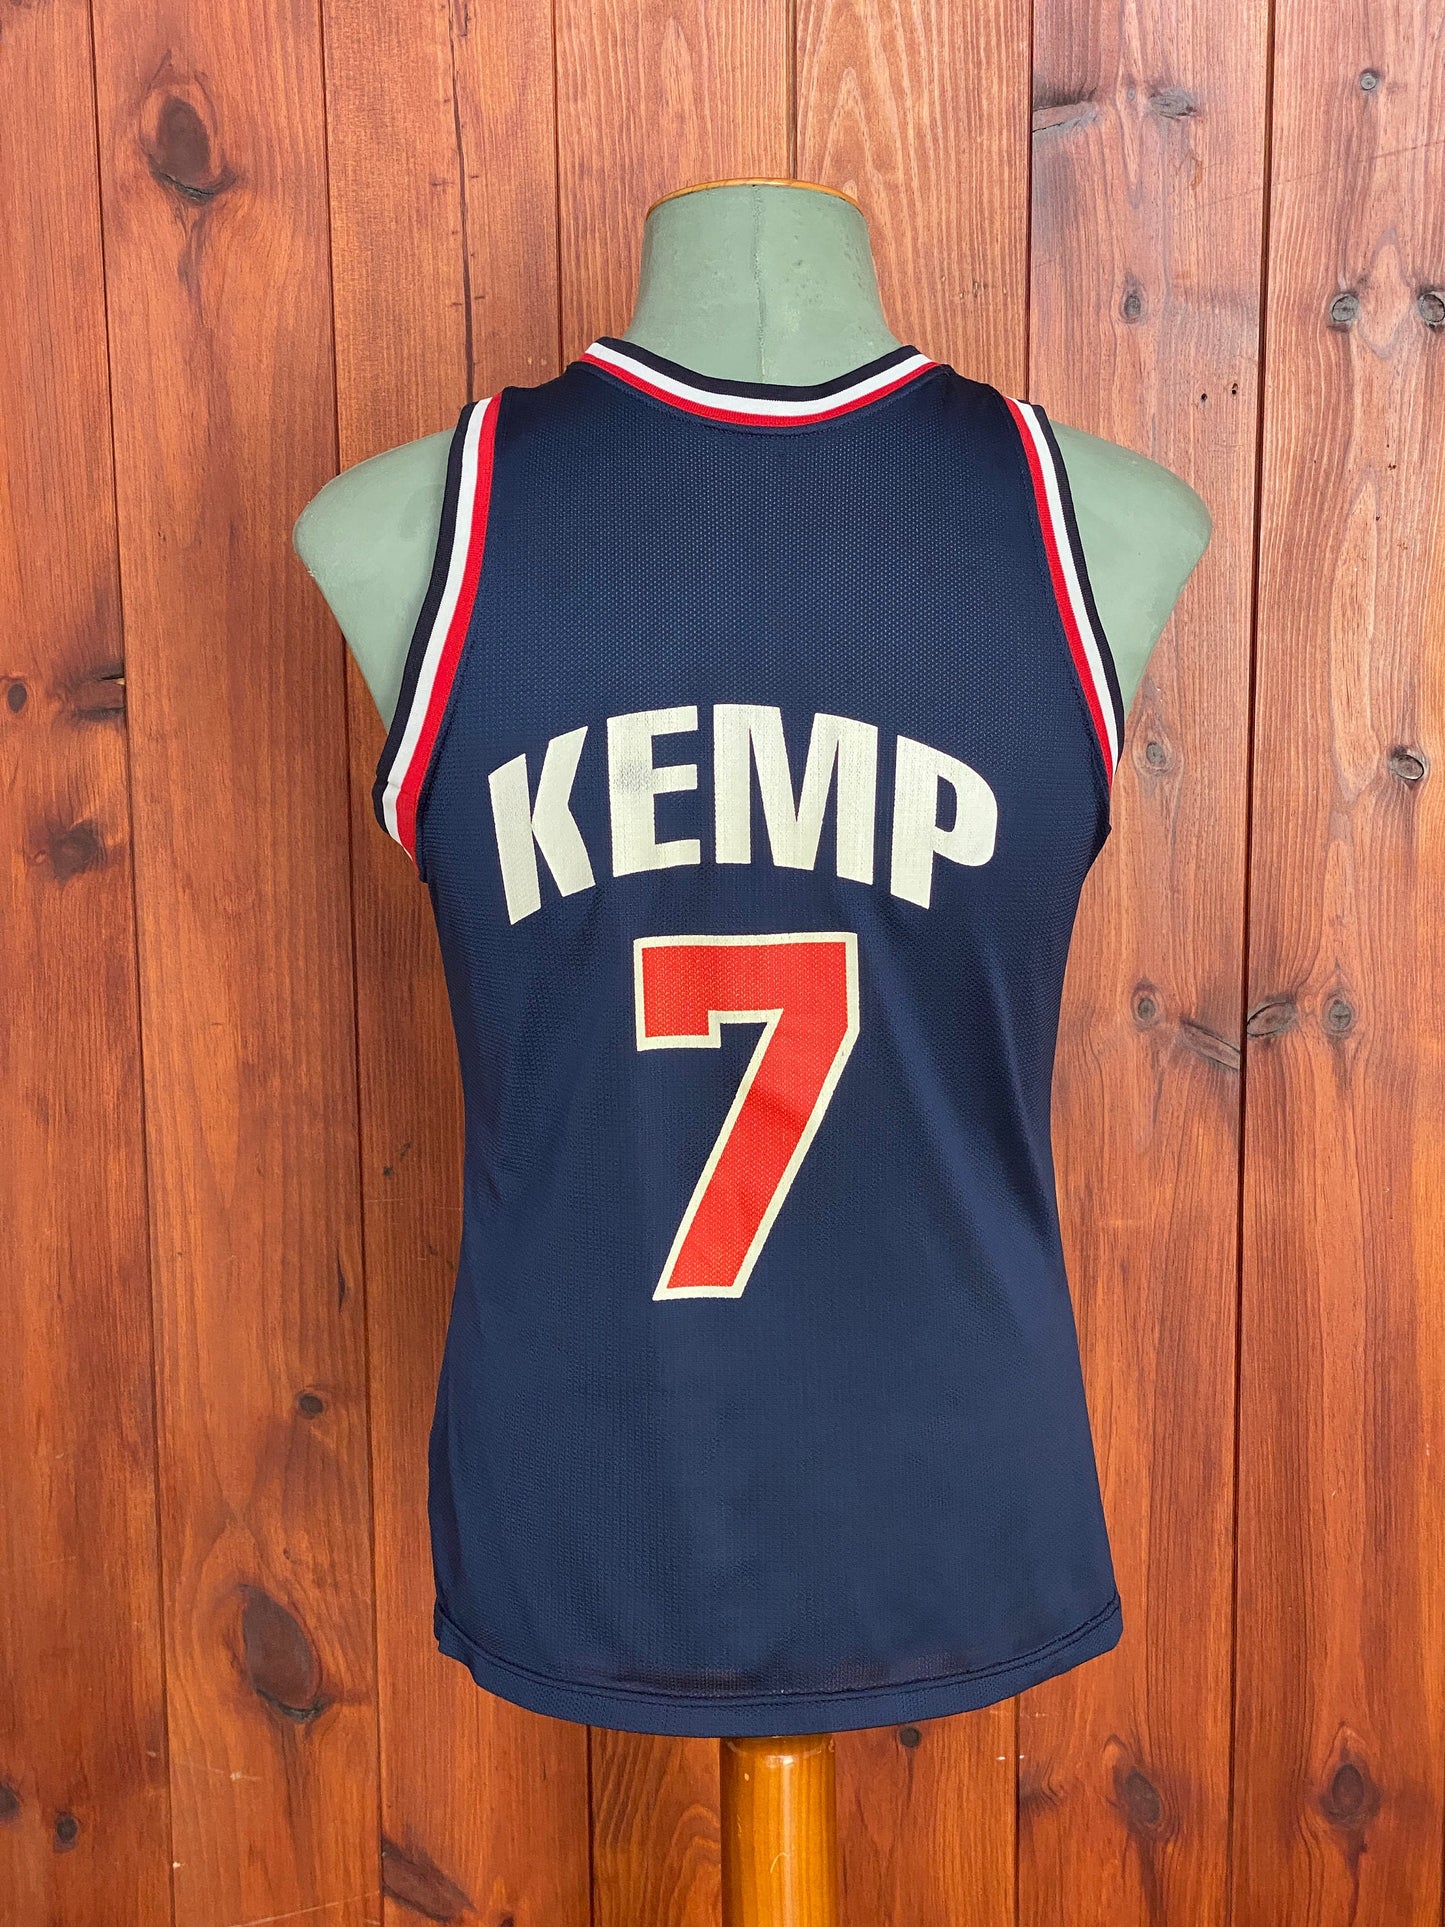 Size 40. # 7 Kemp Vintage 90s Champion jersey USA Dream Team Made in USA